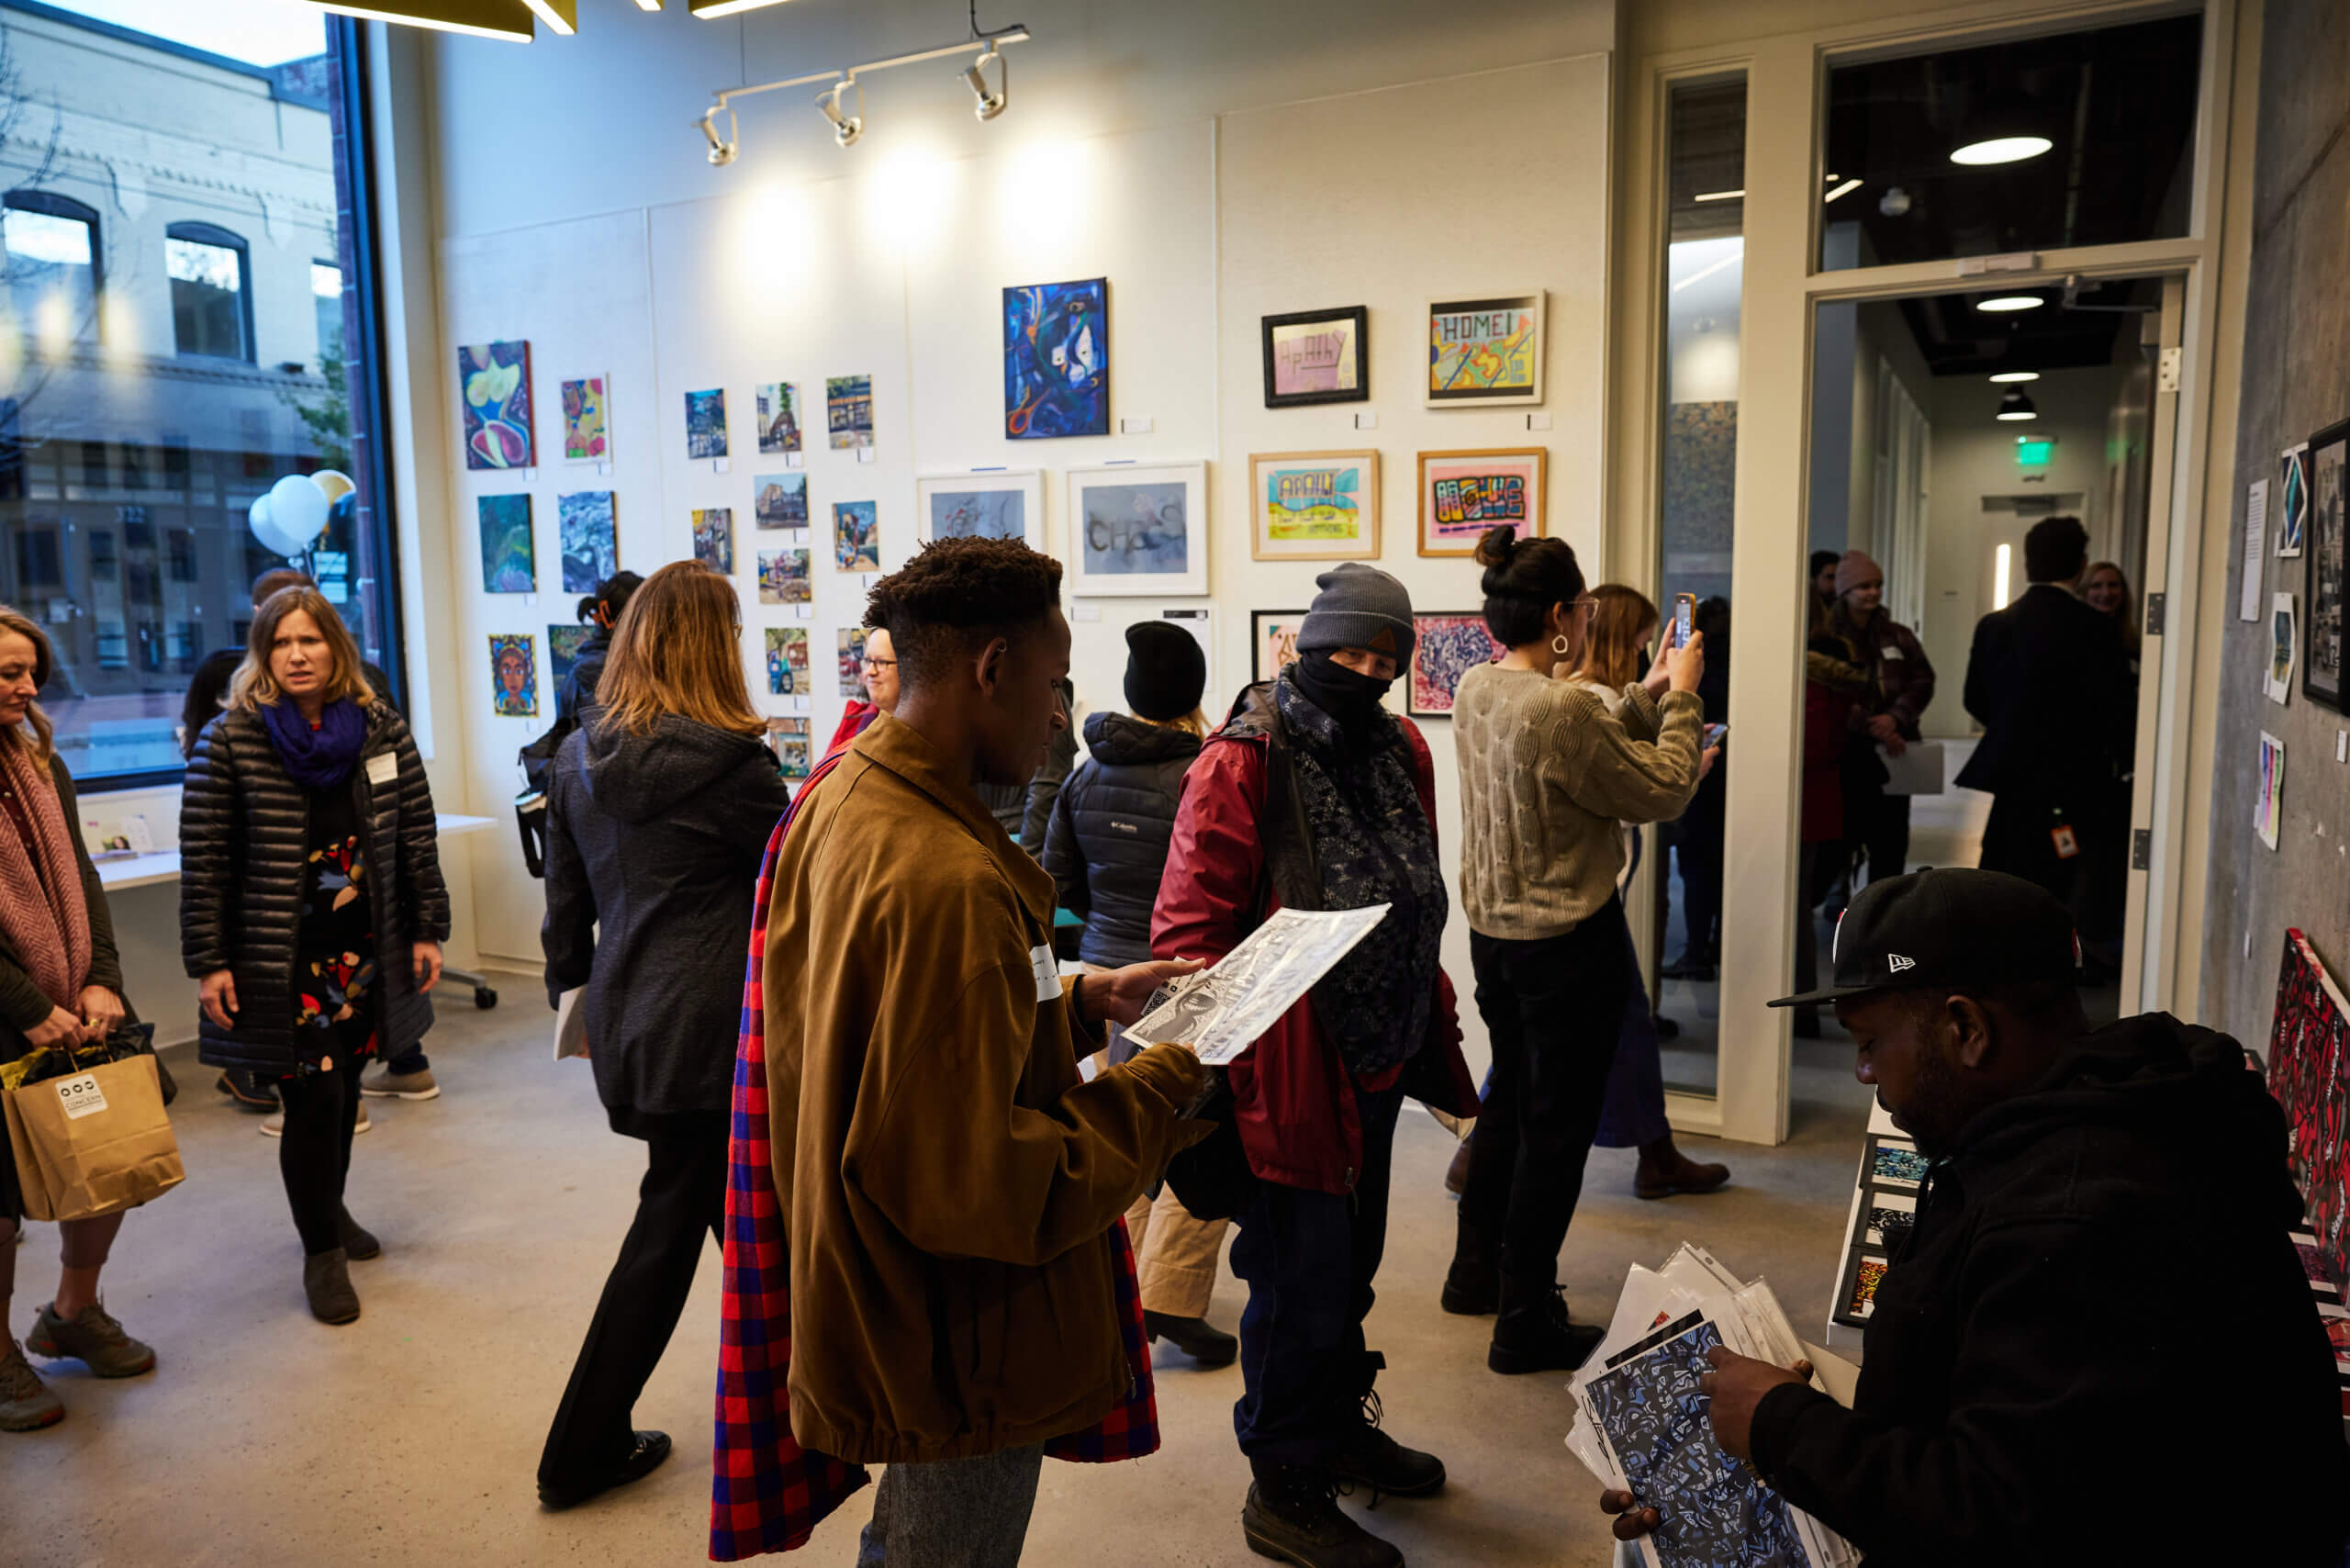 The Zephyr Art Space featured a pop-up art gallery curated by p:ear and Everett Station Lofts